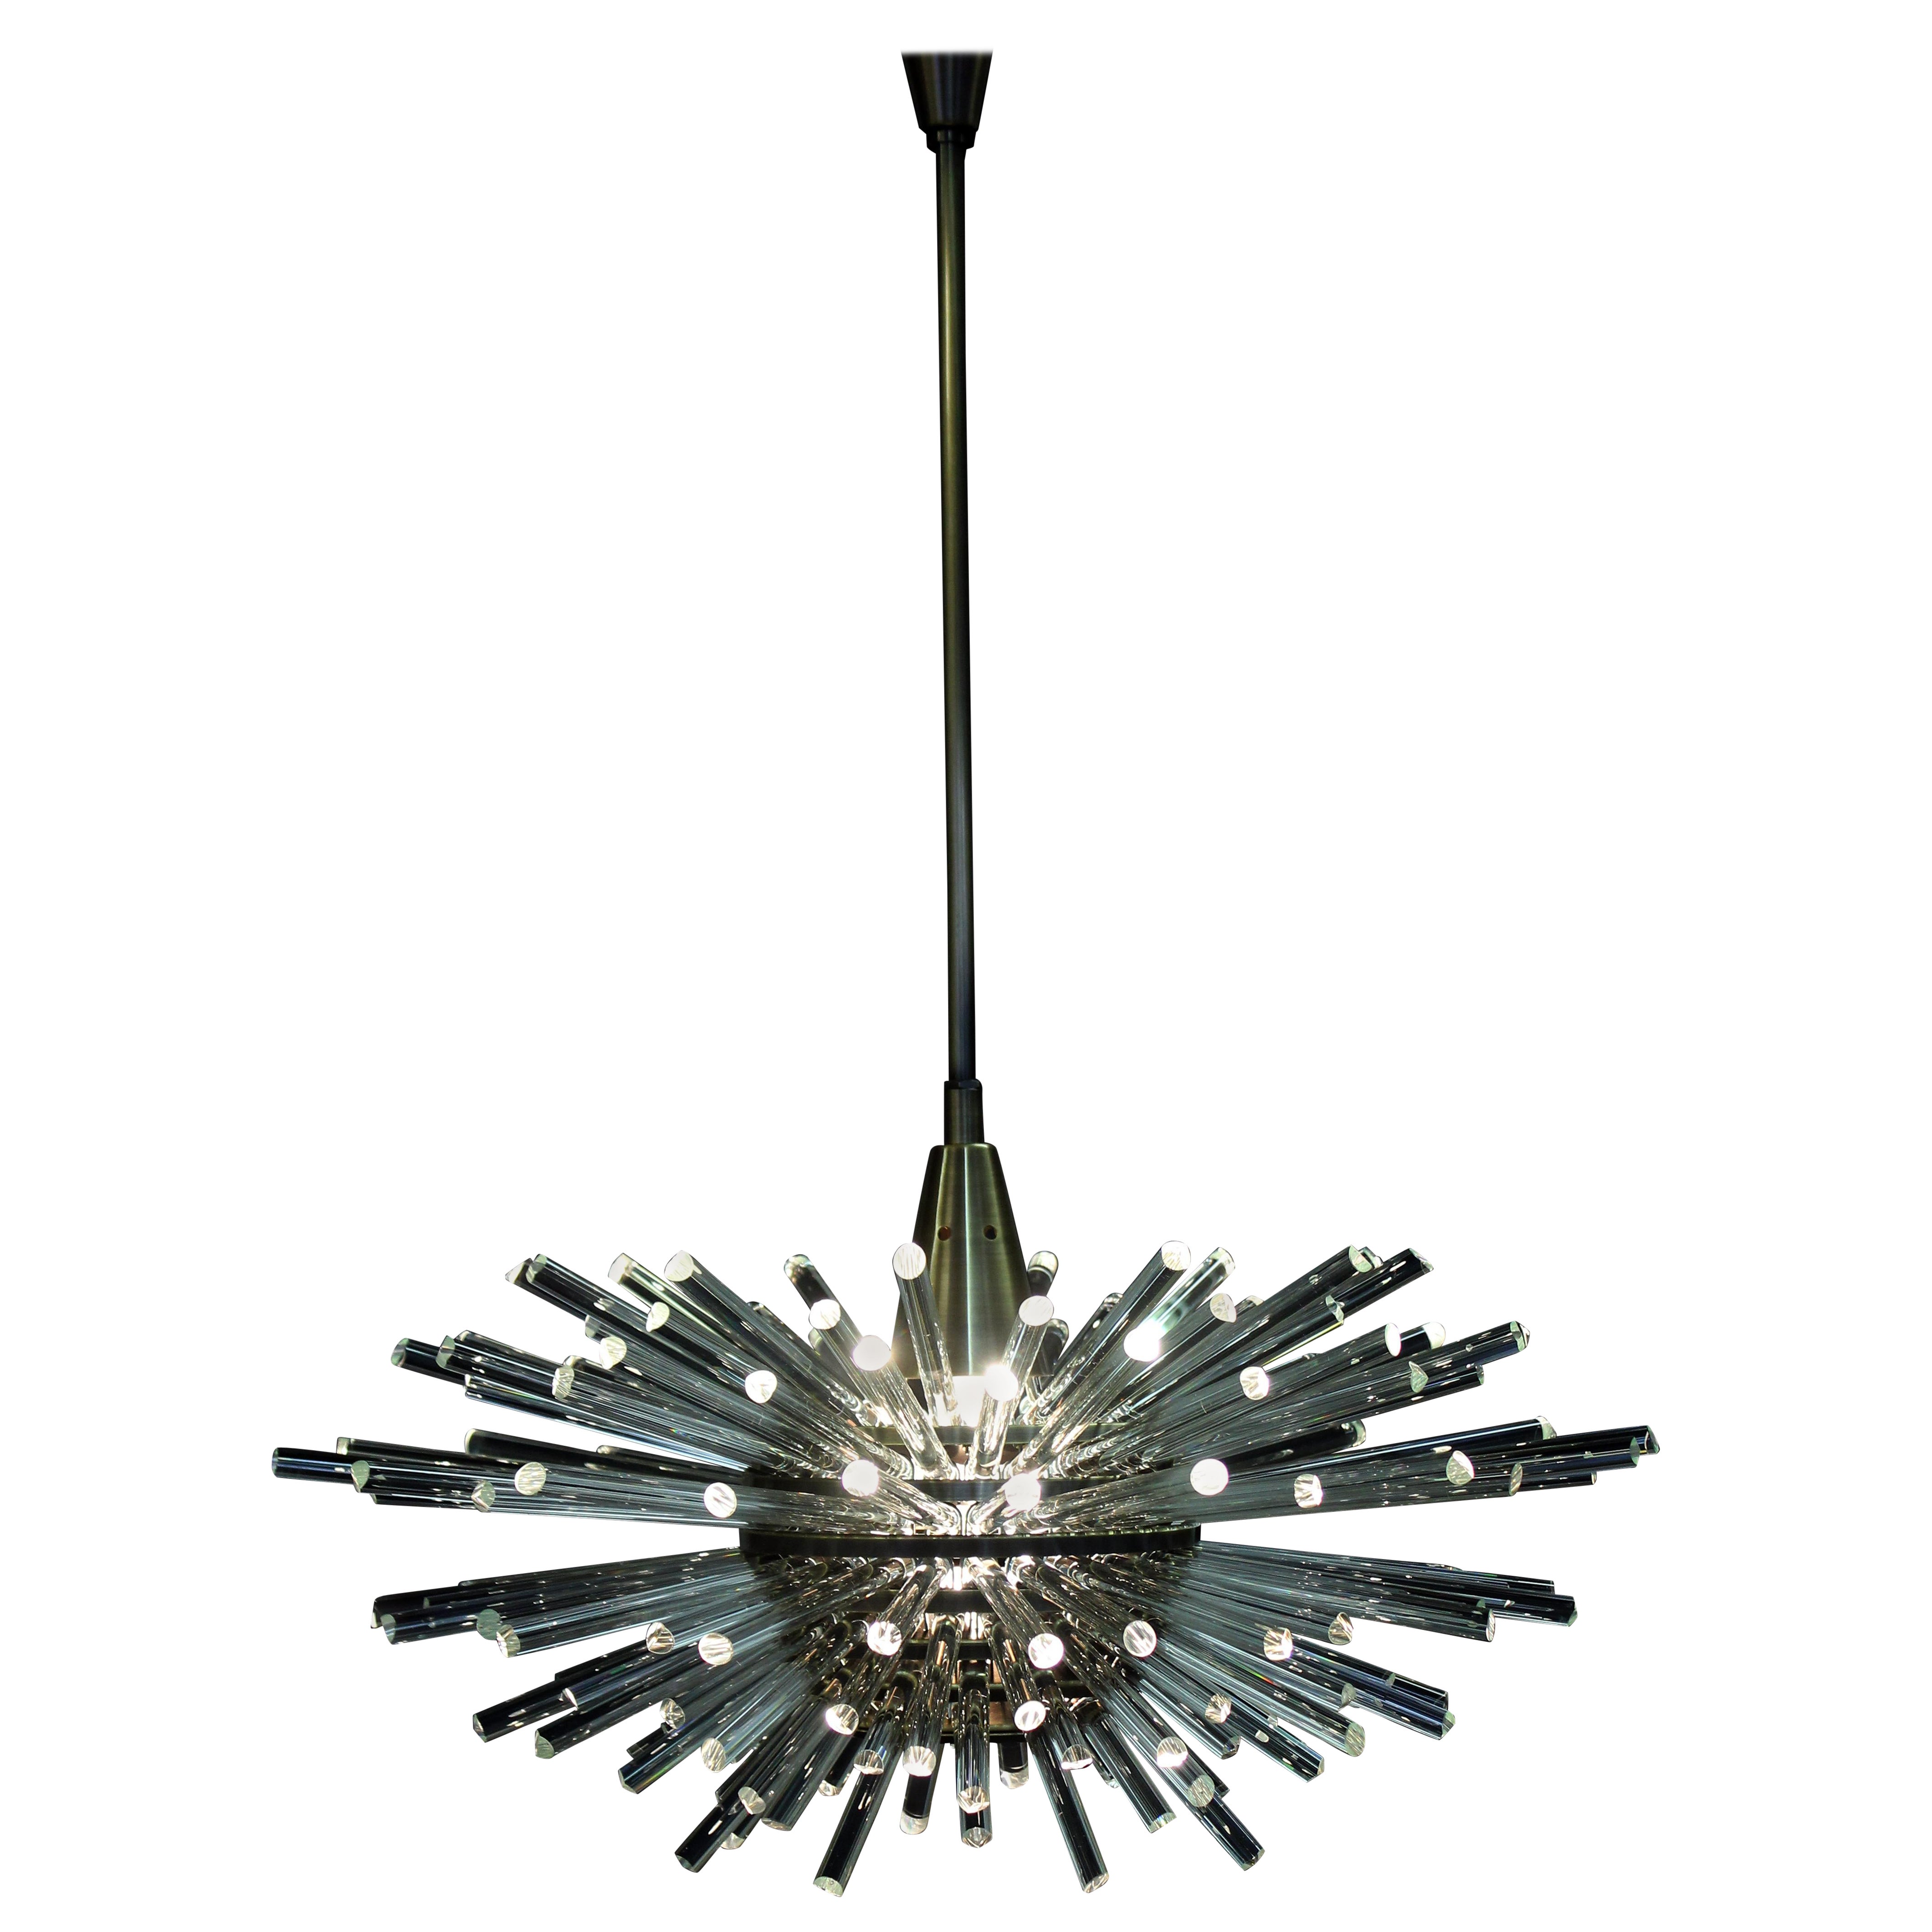 The Bakalowits world famous 1960 model Miracle chandelier For Sale